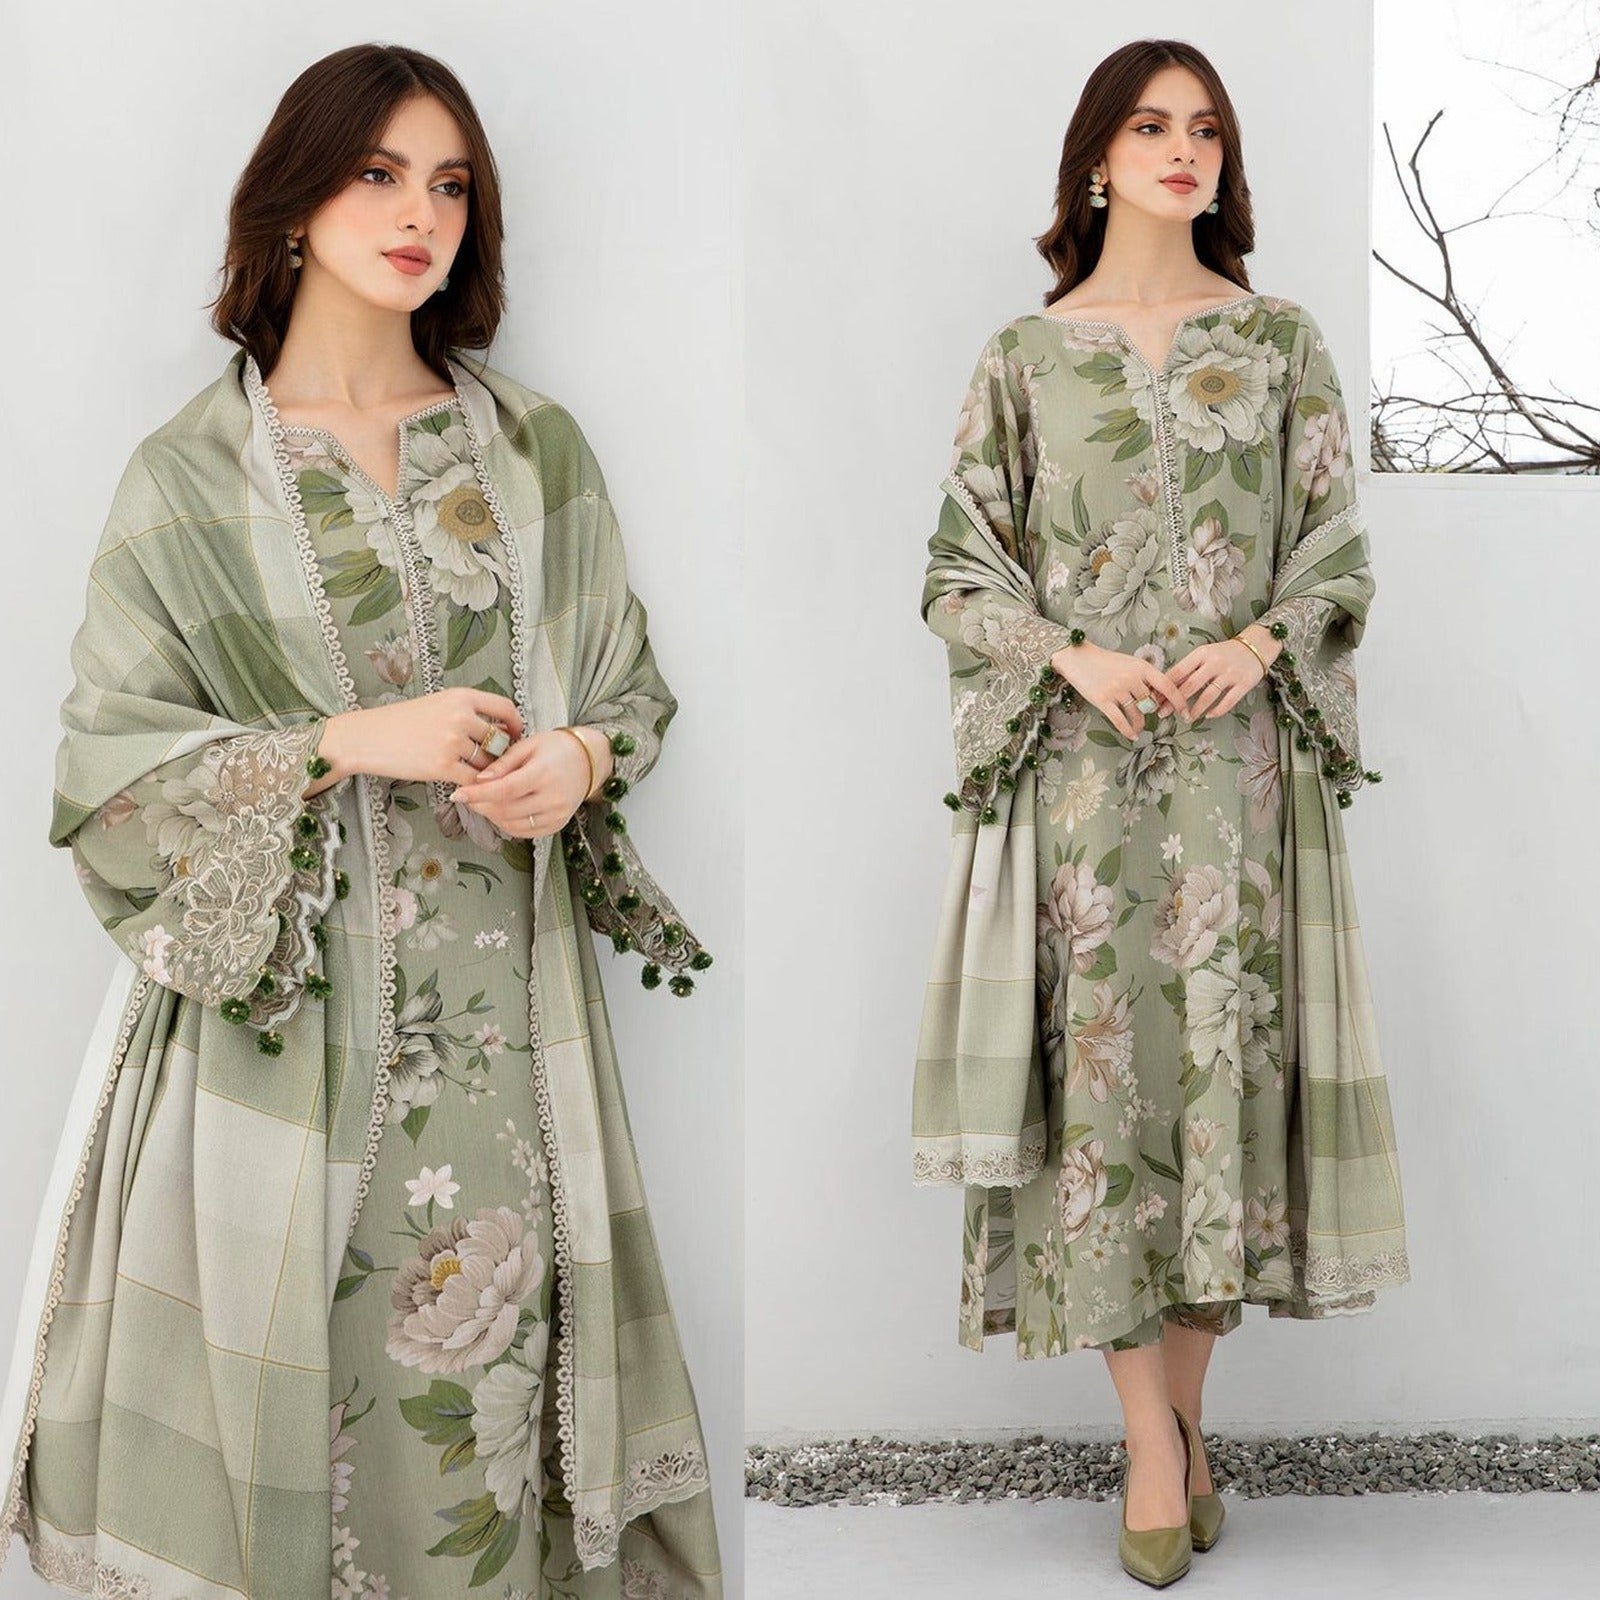 BAROQUE - 3PC Lawn Printed Shirt With Voile Printed Dupatta-763